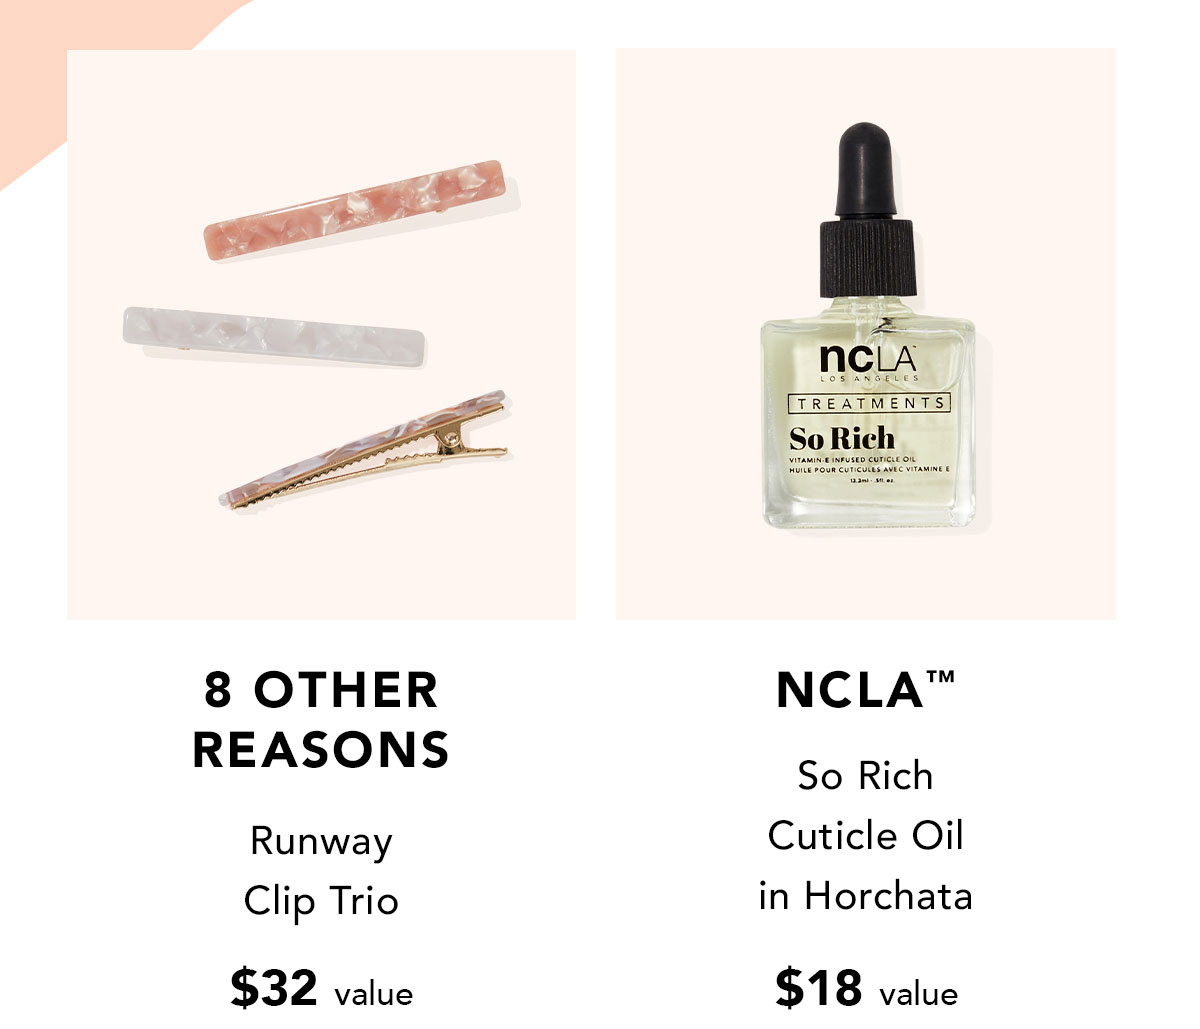 8 Other Reasons Runway Clip Trio $32 value | NCLA™ So Rich Cuticle Oil in Horchata $18 value